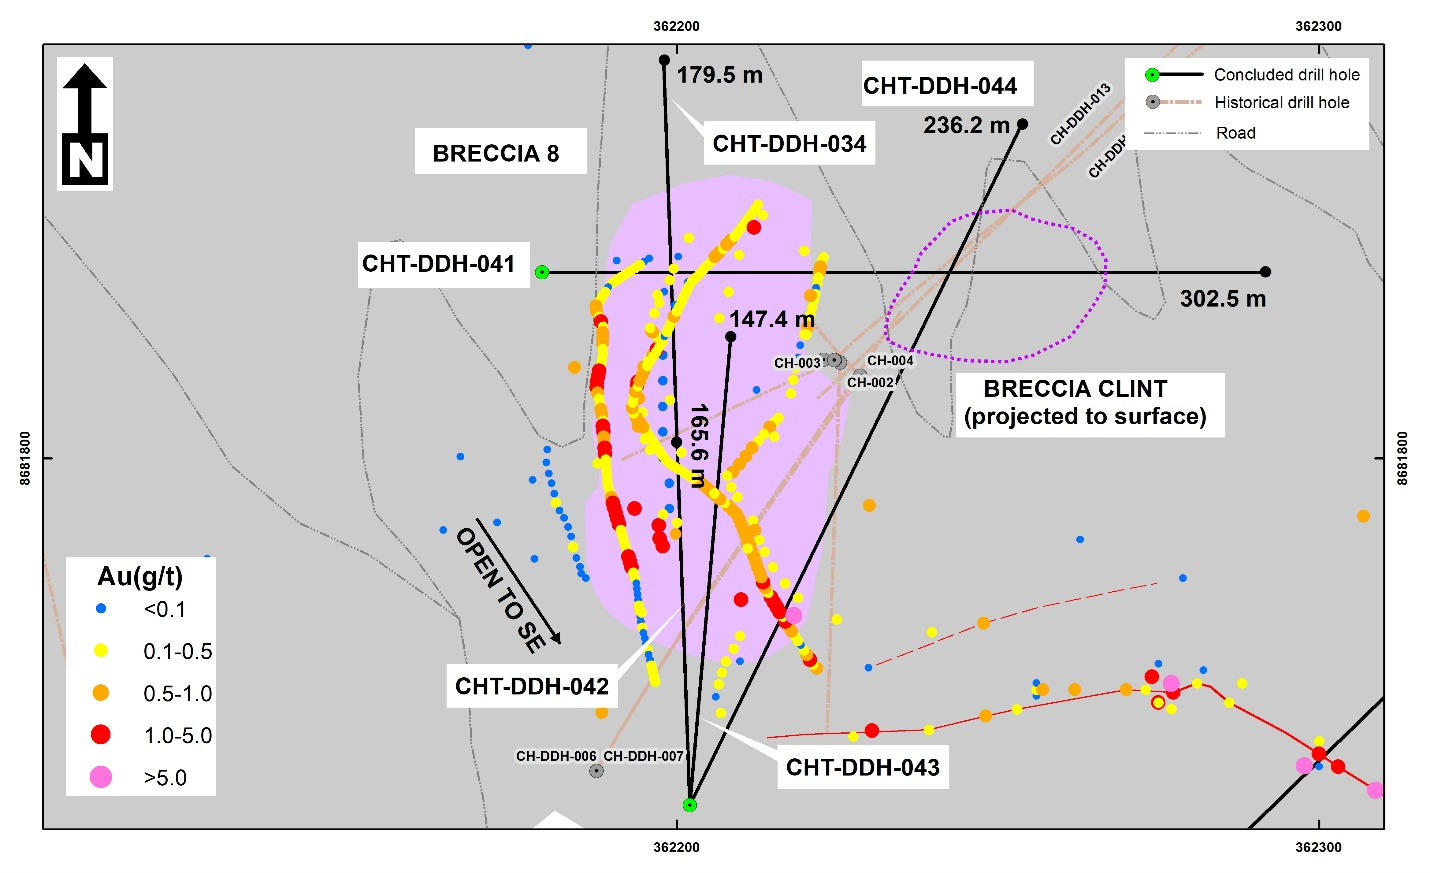 Figure 3 – Details of drilling completed at Breccia 8 and Breccia Clint